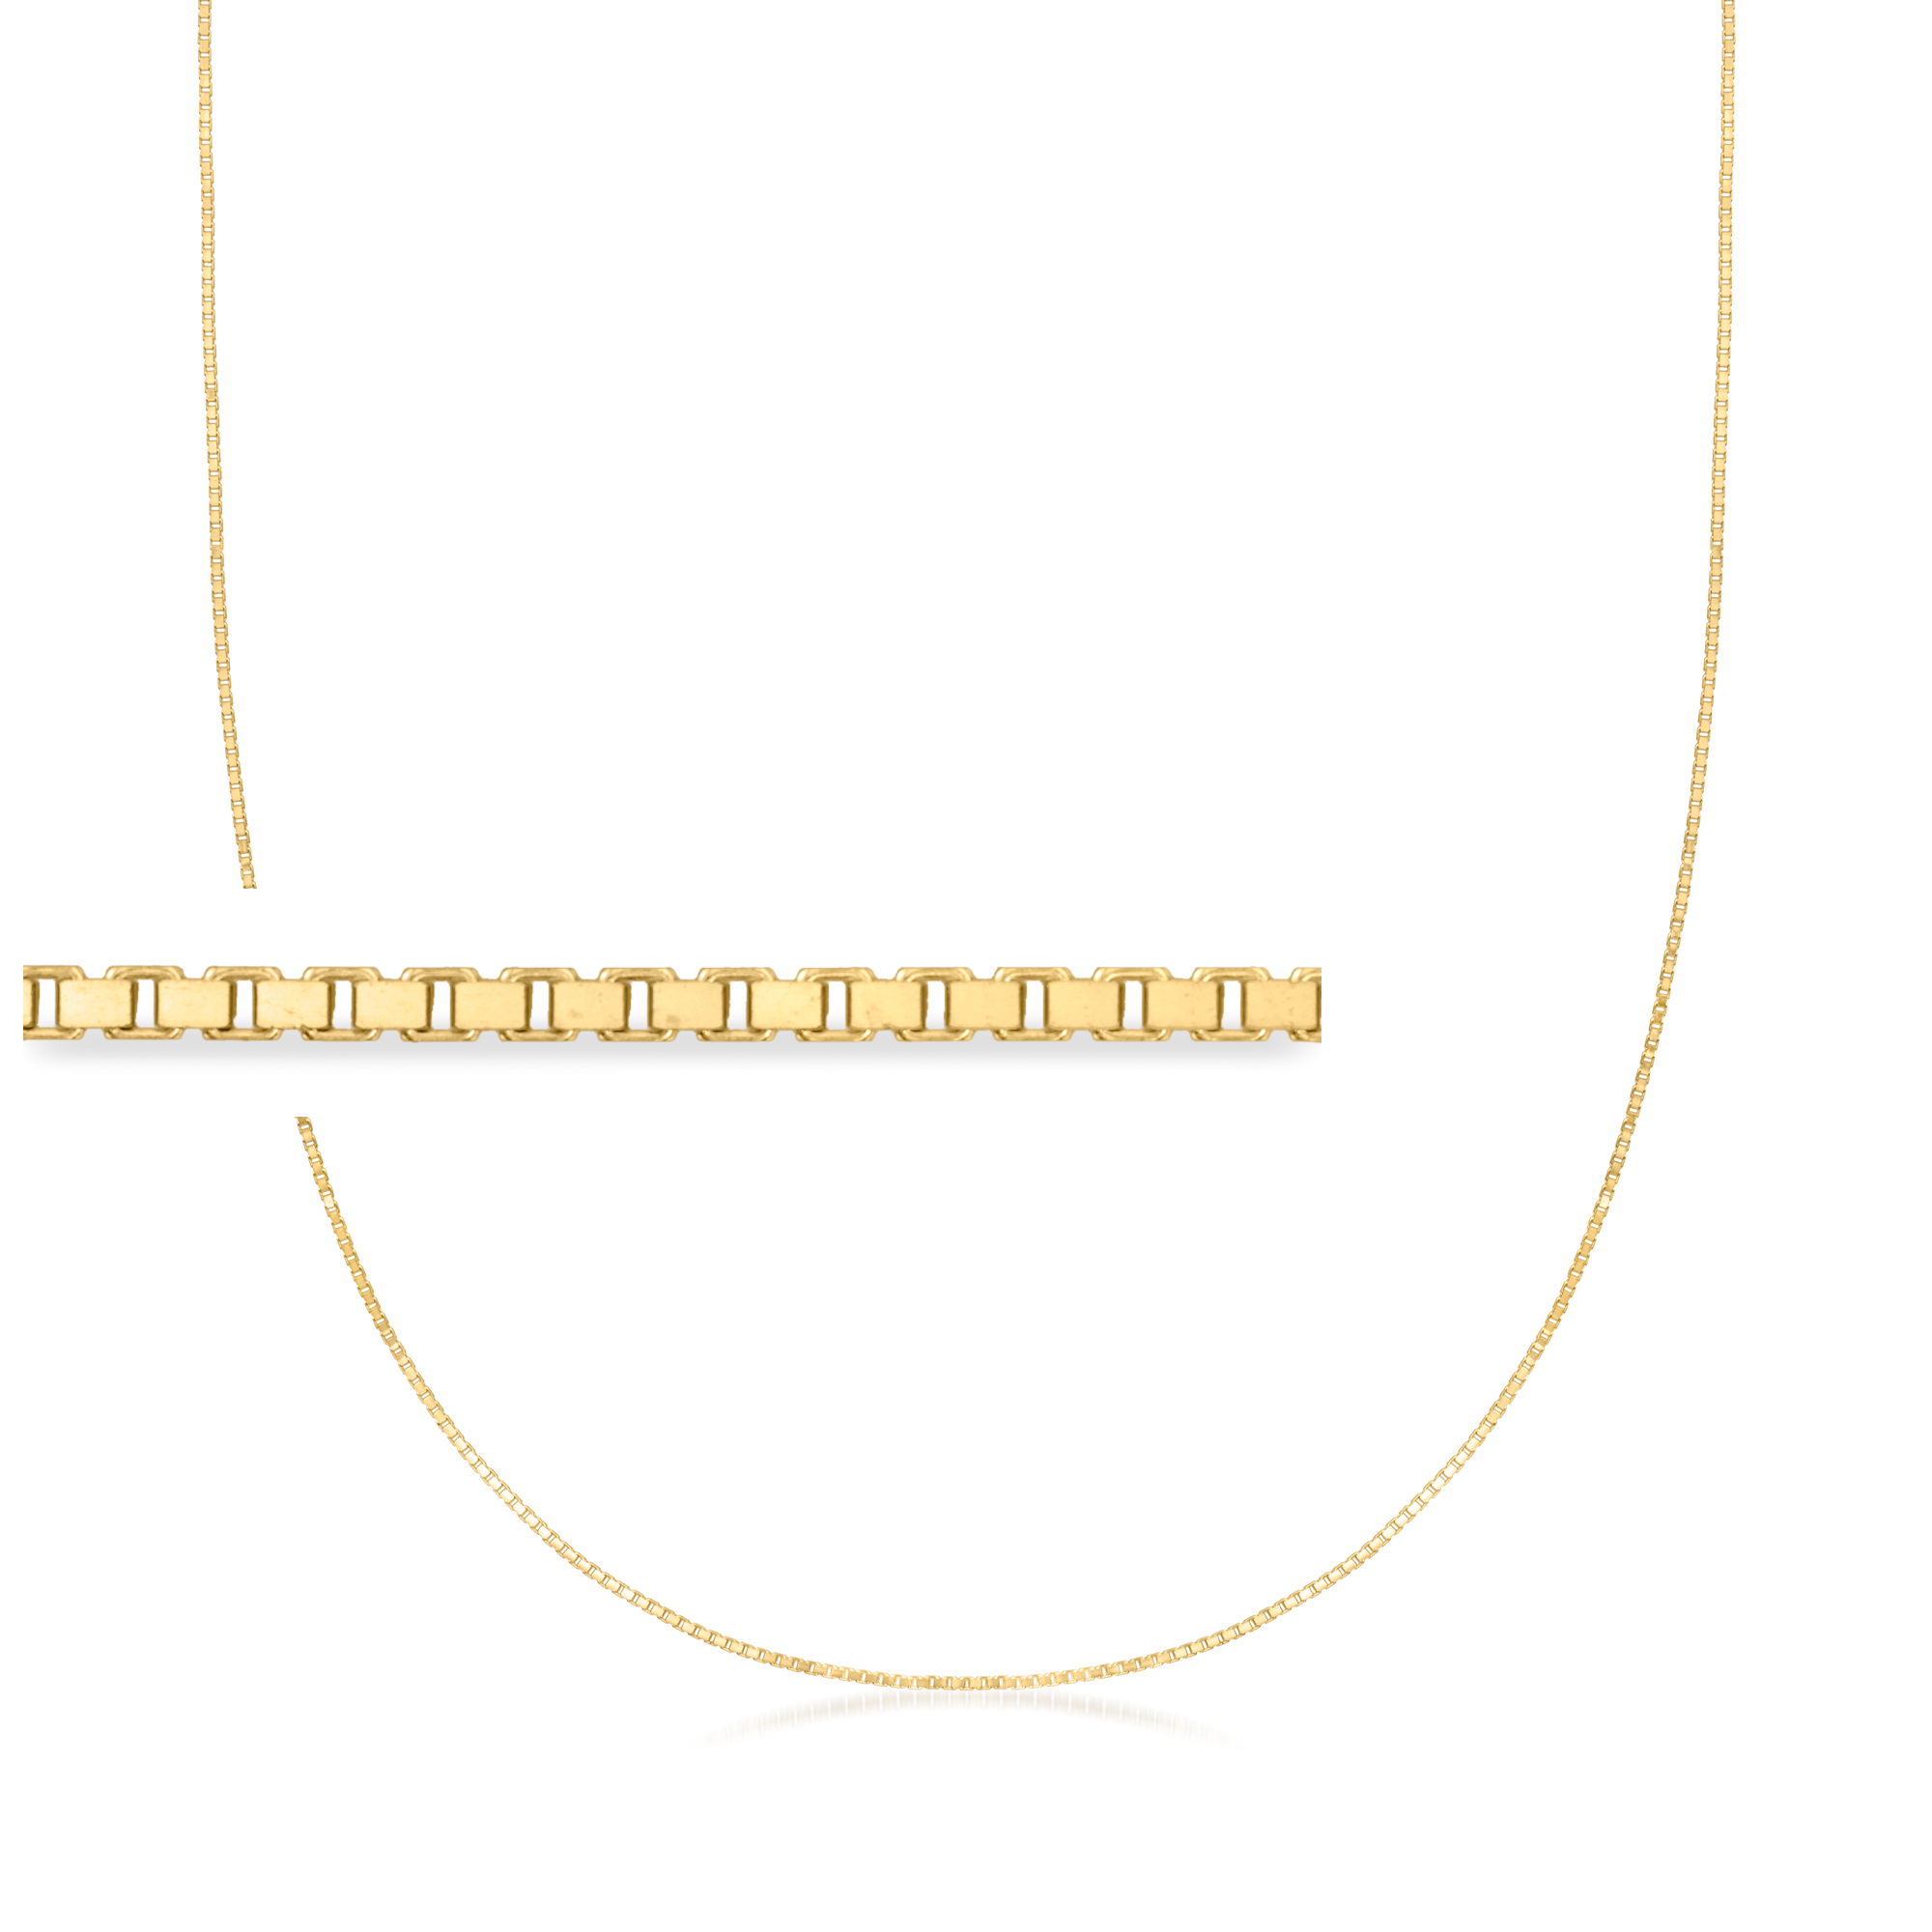 Details about   Real 14kt Yellow Gold .5mm Box Chain 